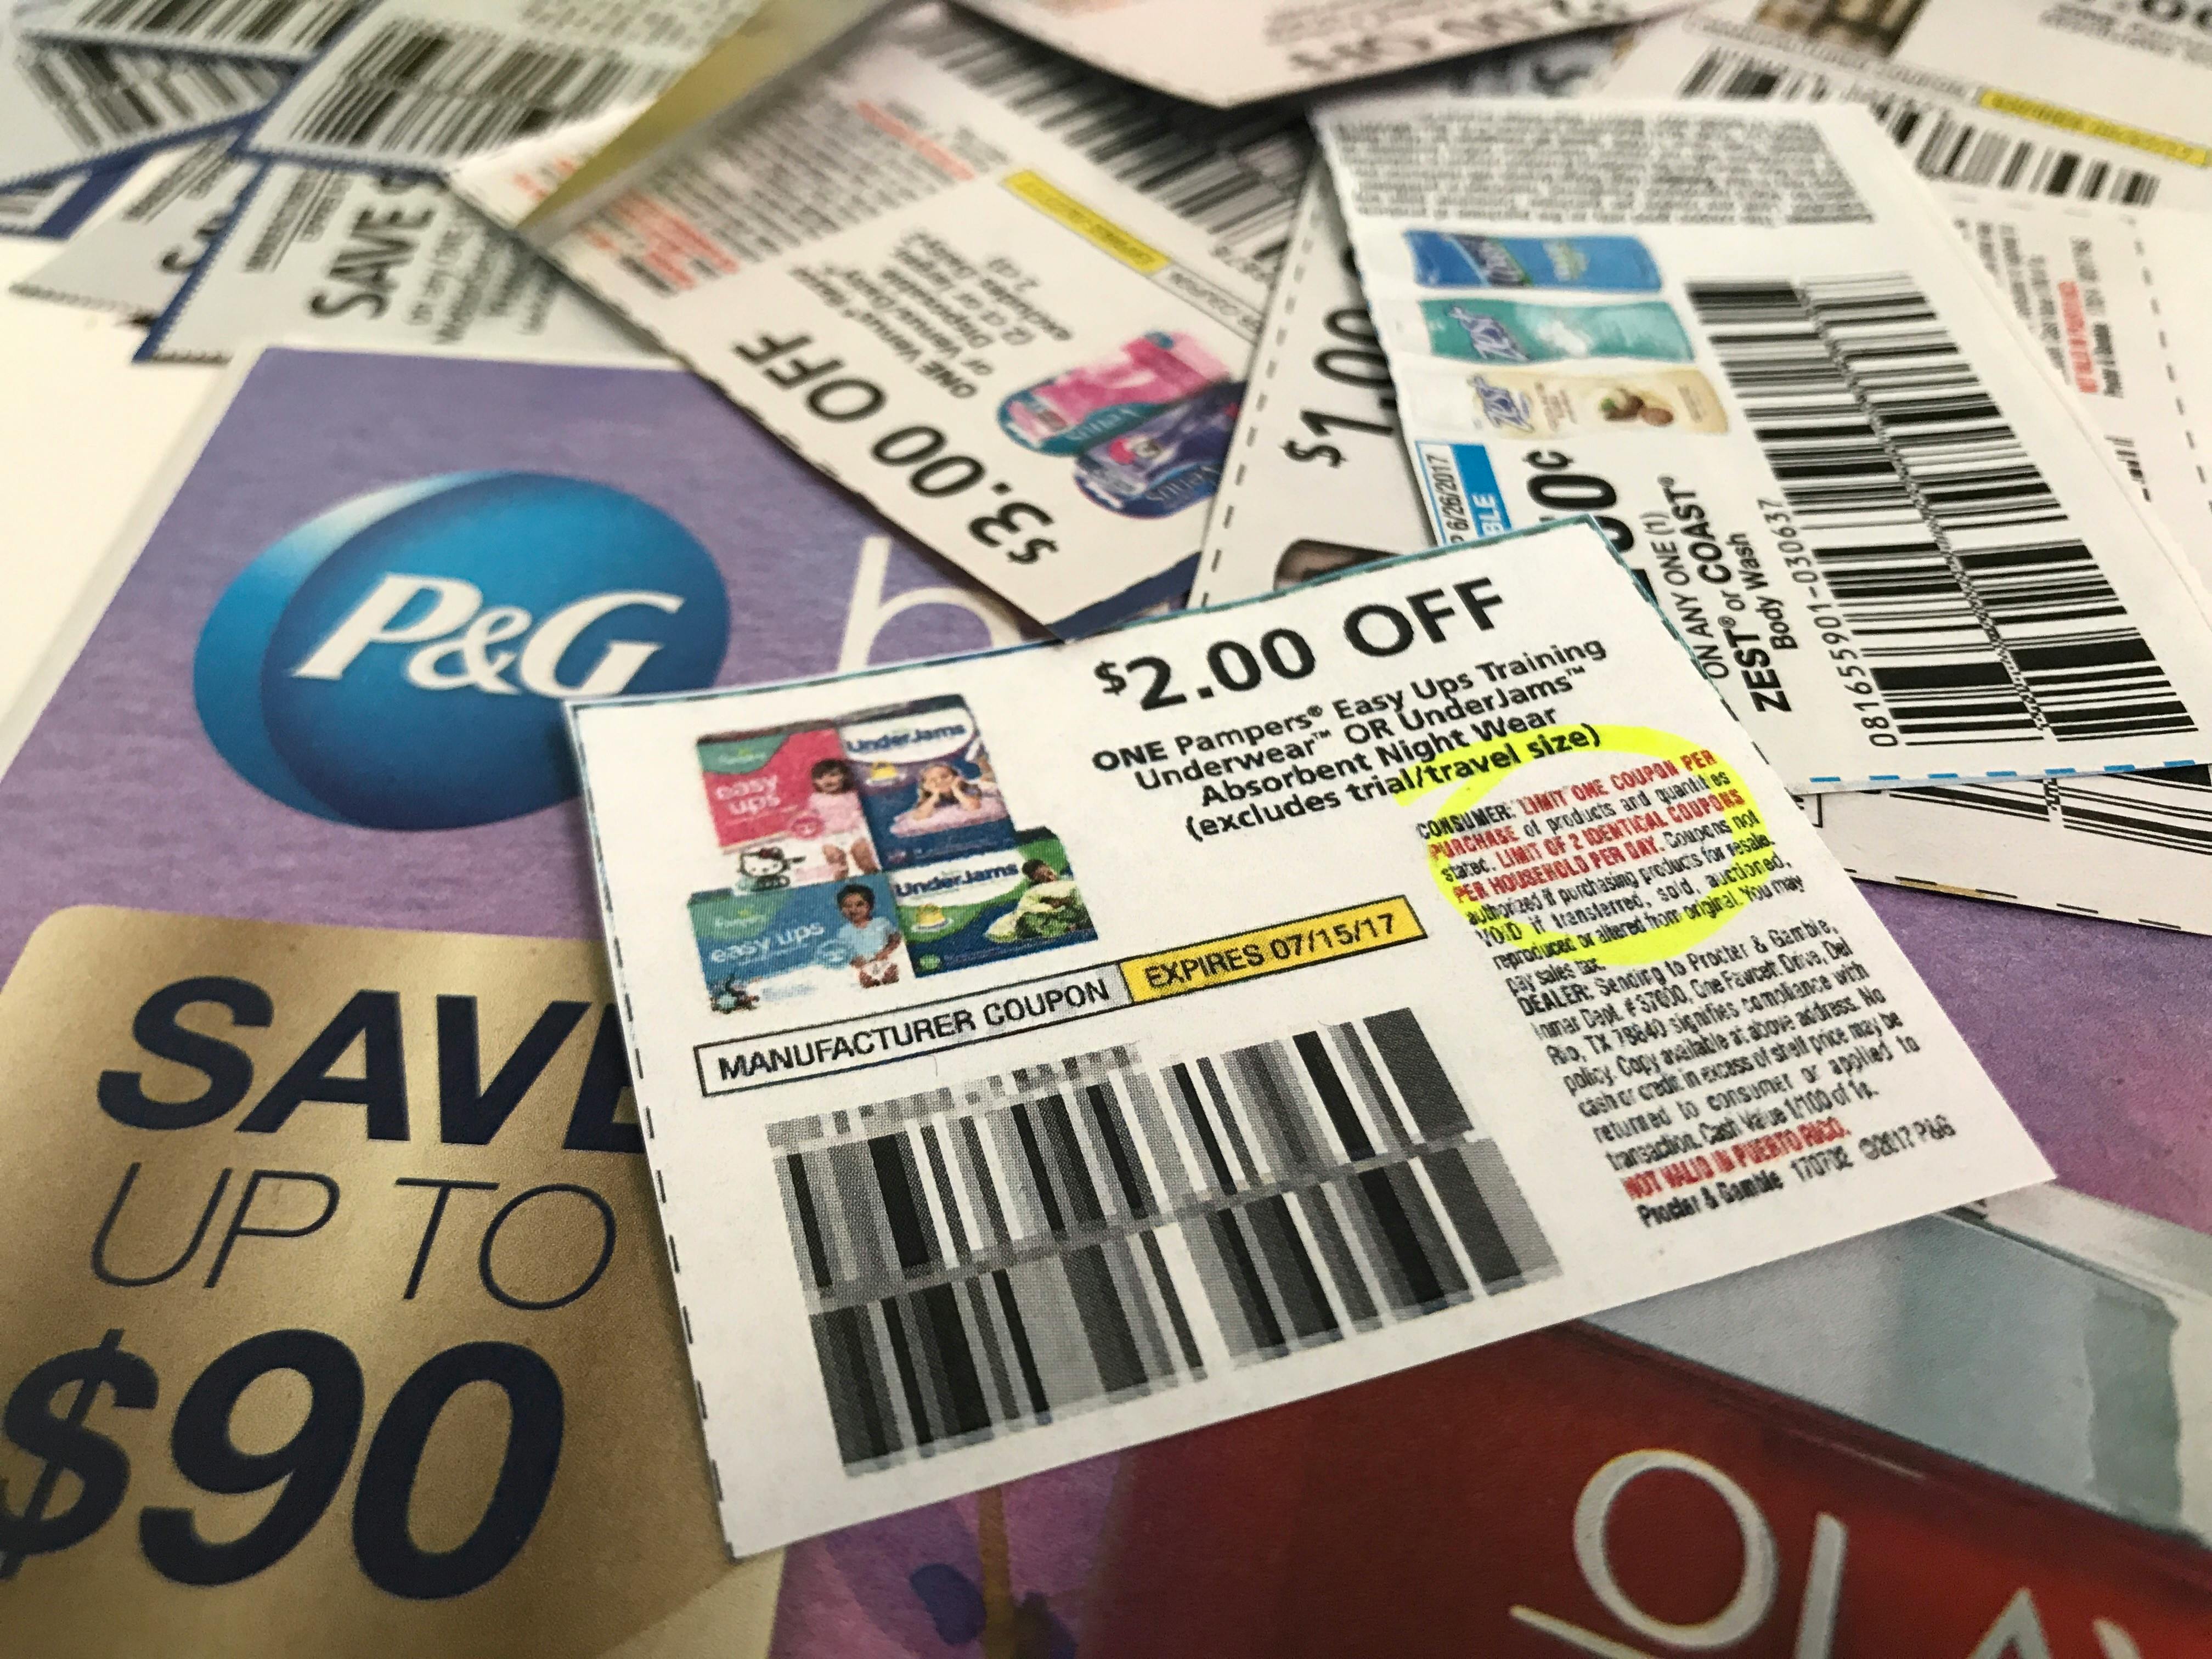 new-p-g-restrictions-your-printable-coupons-now-expire-in-one-day-the-krazy-coupon-lady